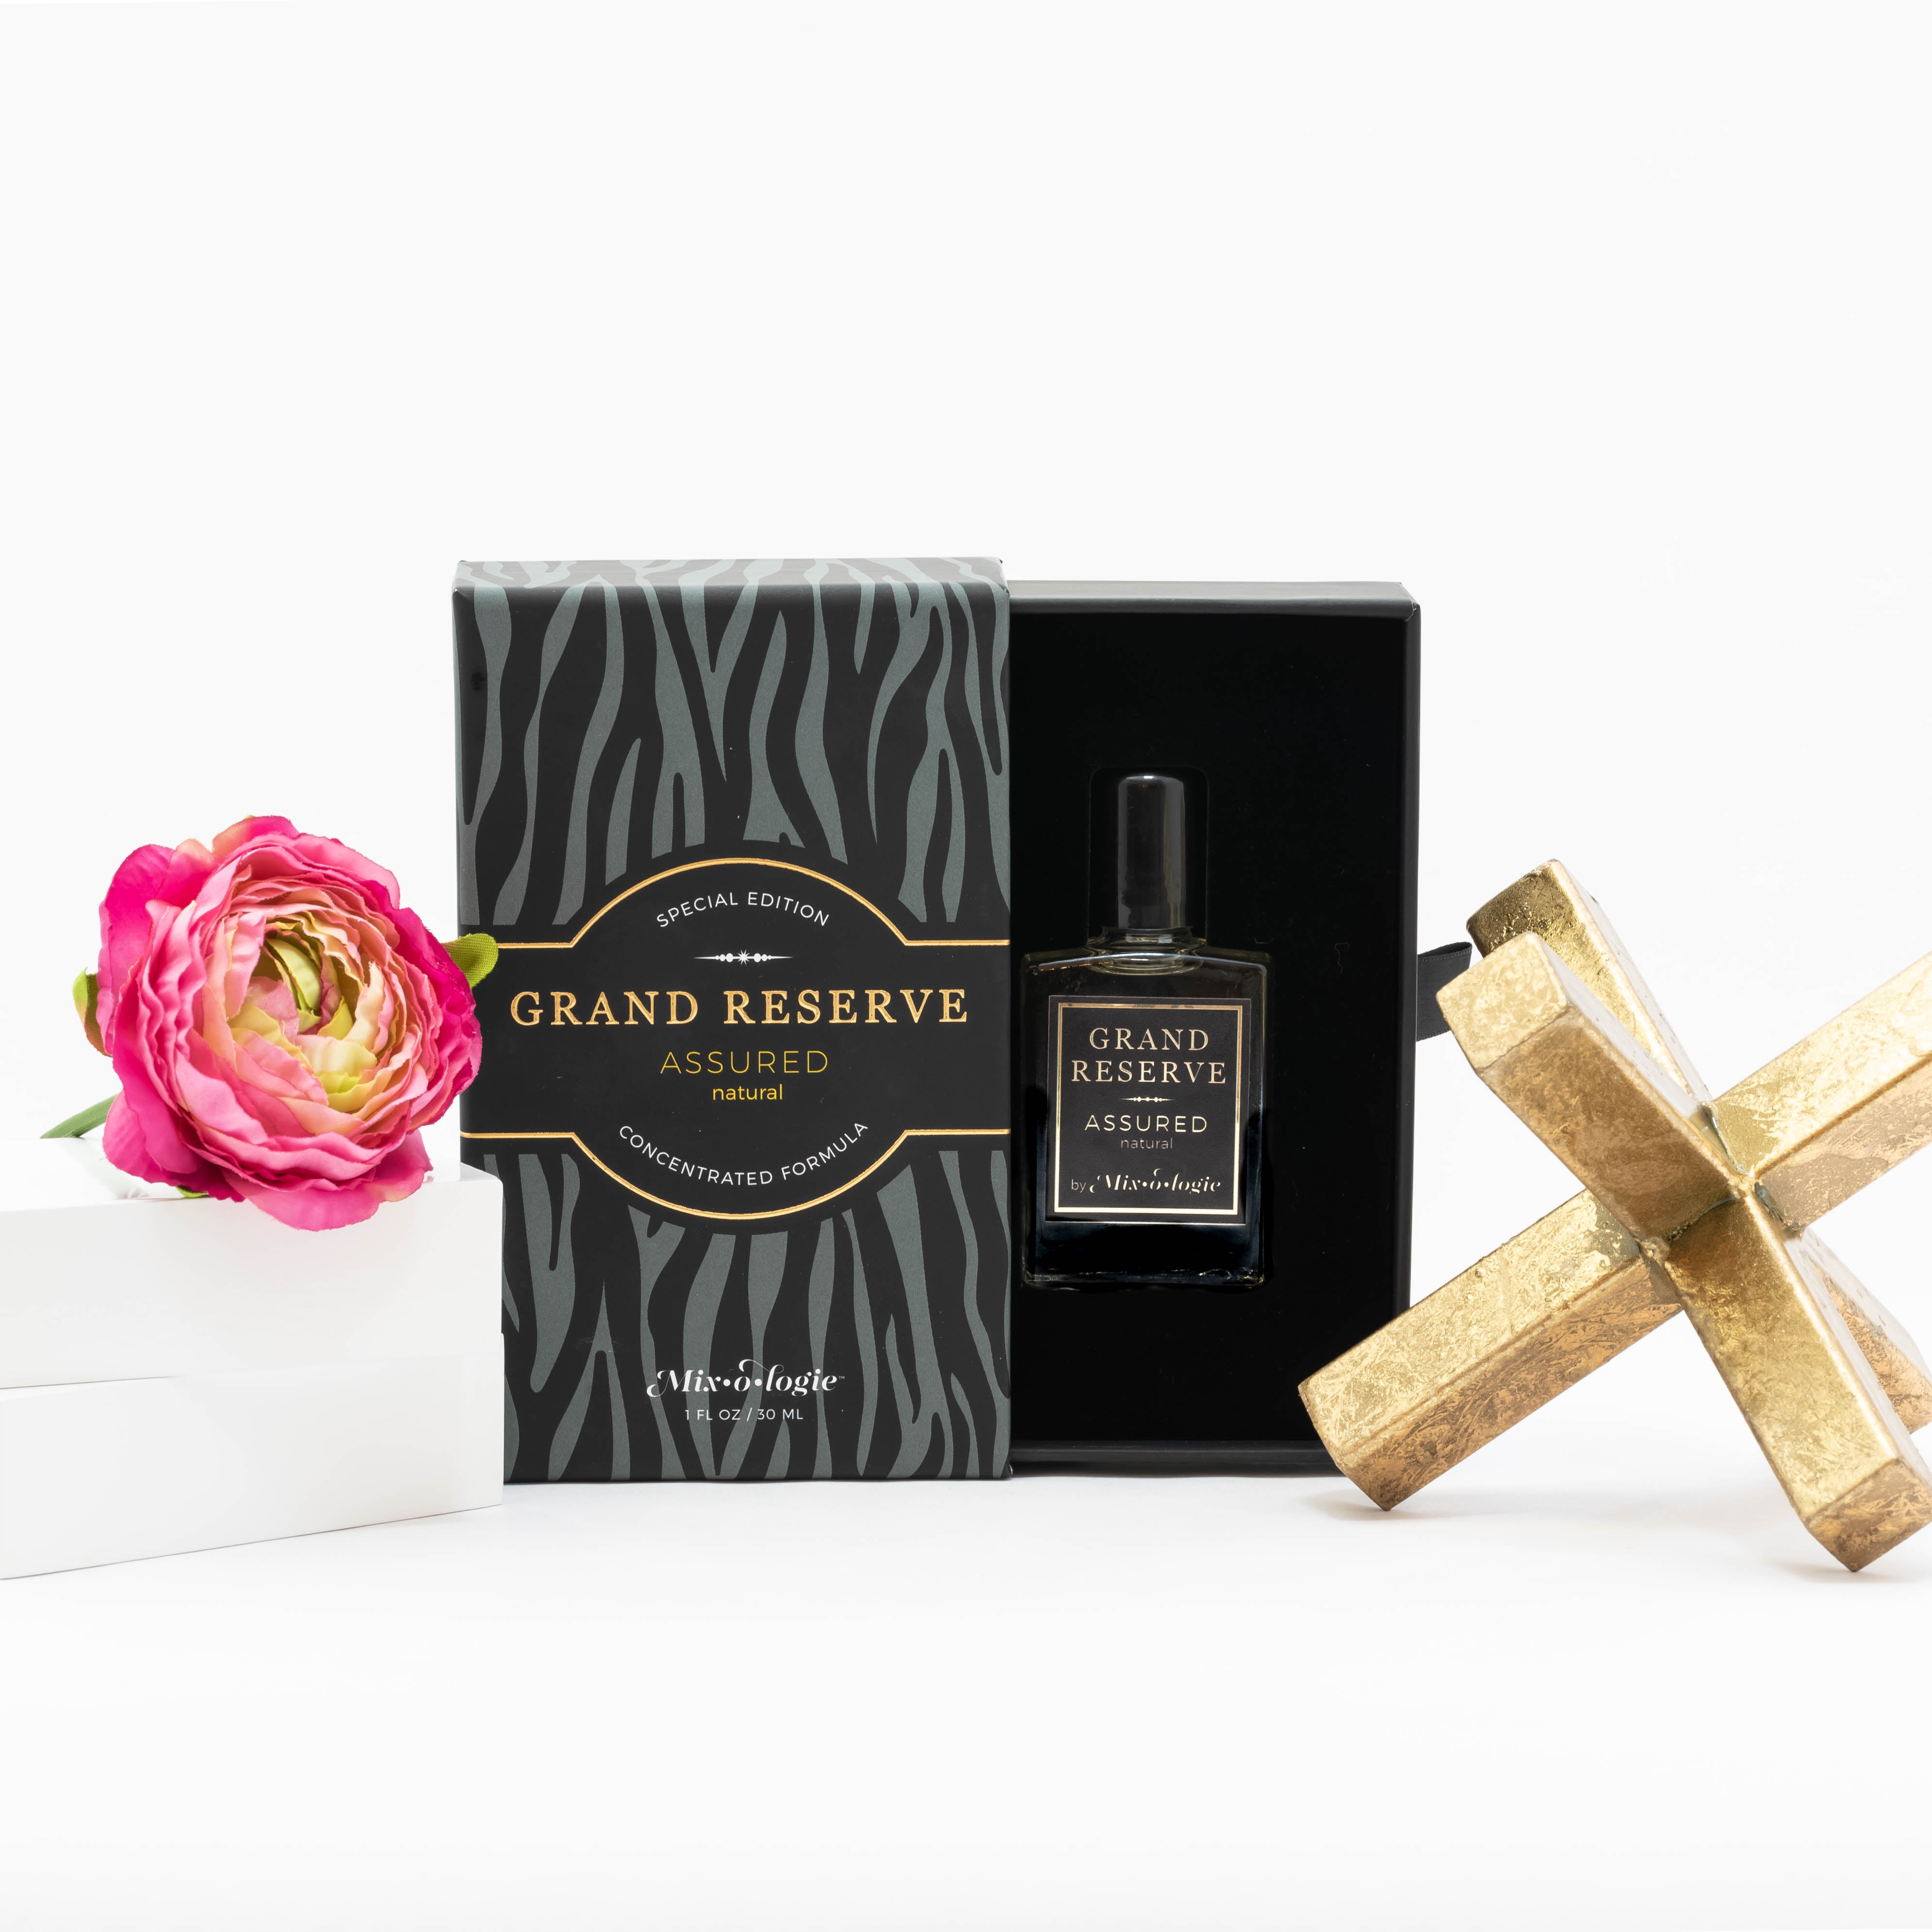 Assured (Natural) Special Edition Grand Reserve concentrated formula in clear glass rectangle perfume bottle that has 1 fl oz or 30 mL of light-yellow liquid with black cap, label, and spray nozzle. Black zebra pattern rectangle box with mustard letting. Grand Reserve and box pictured with white background pink flower and gold table decor